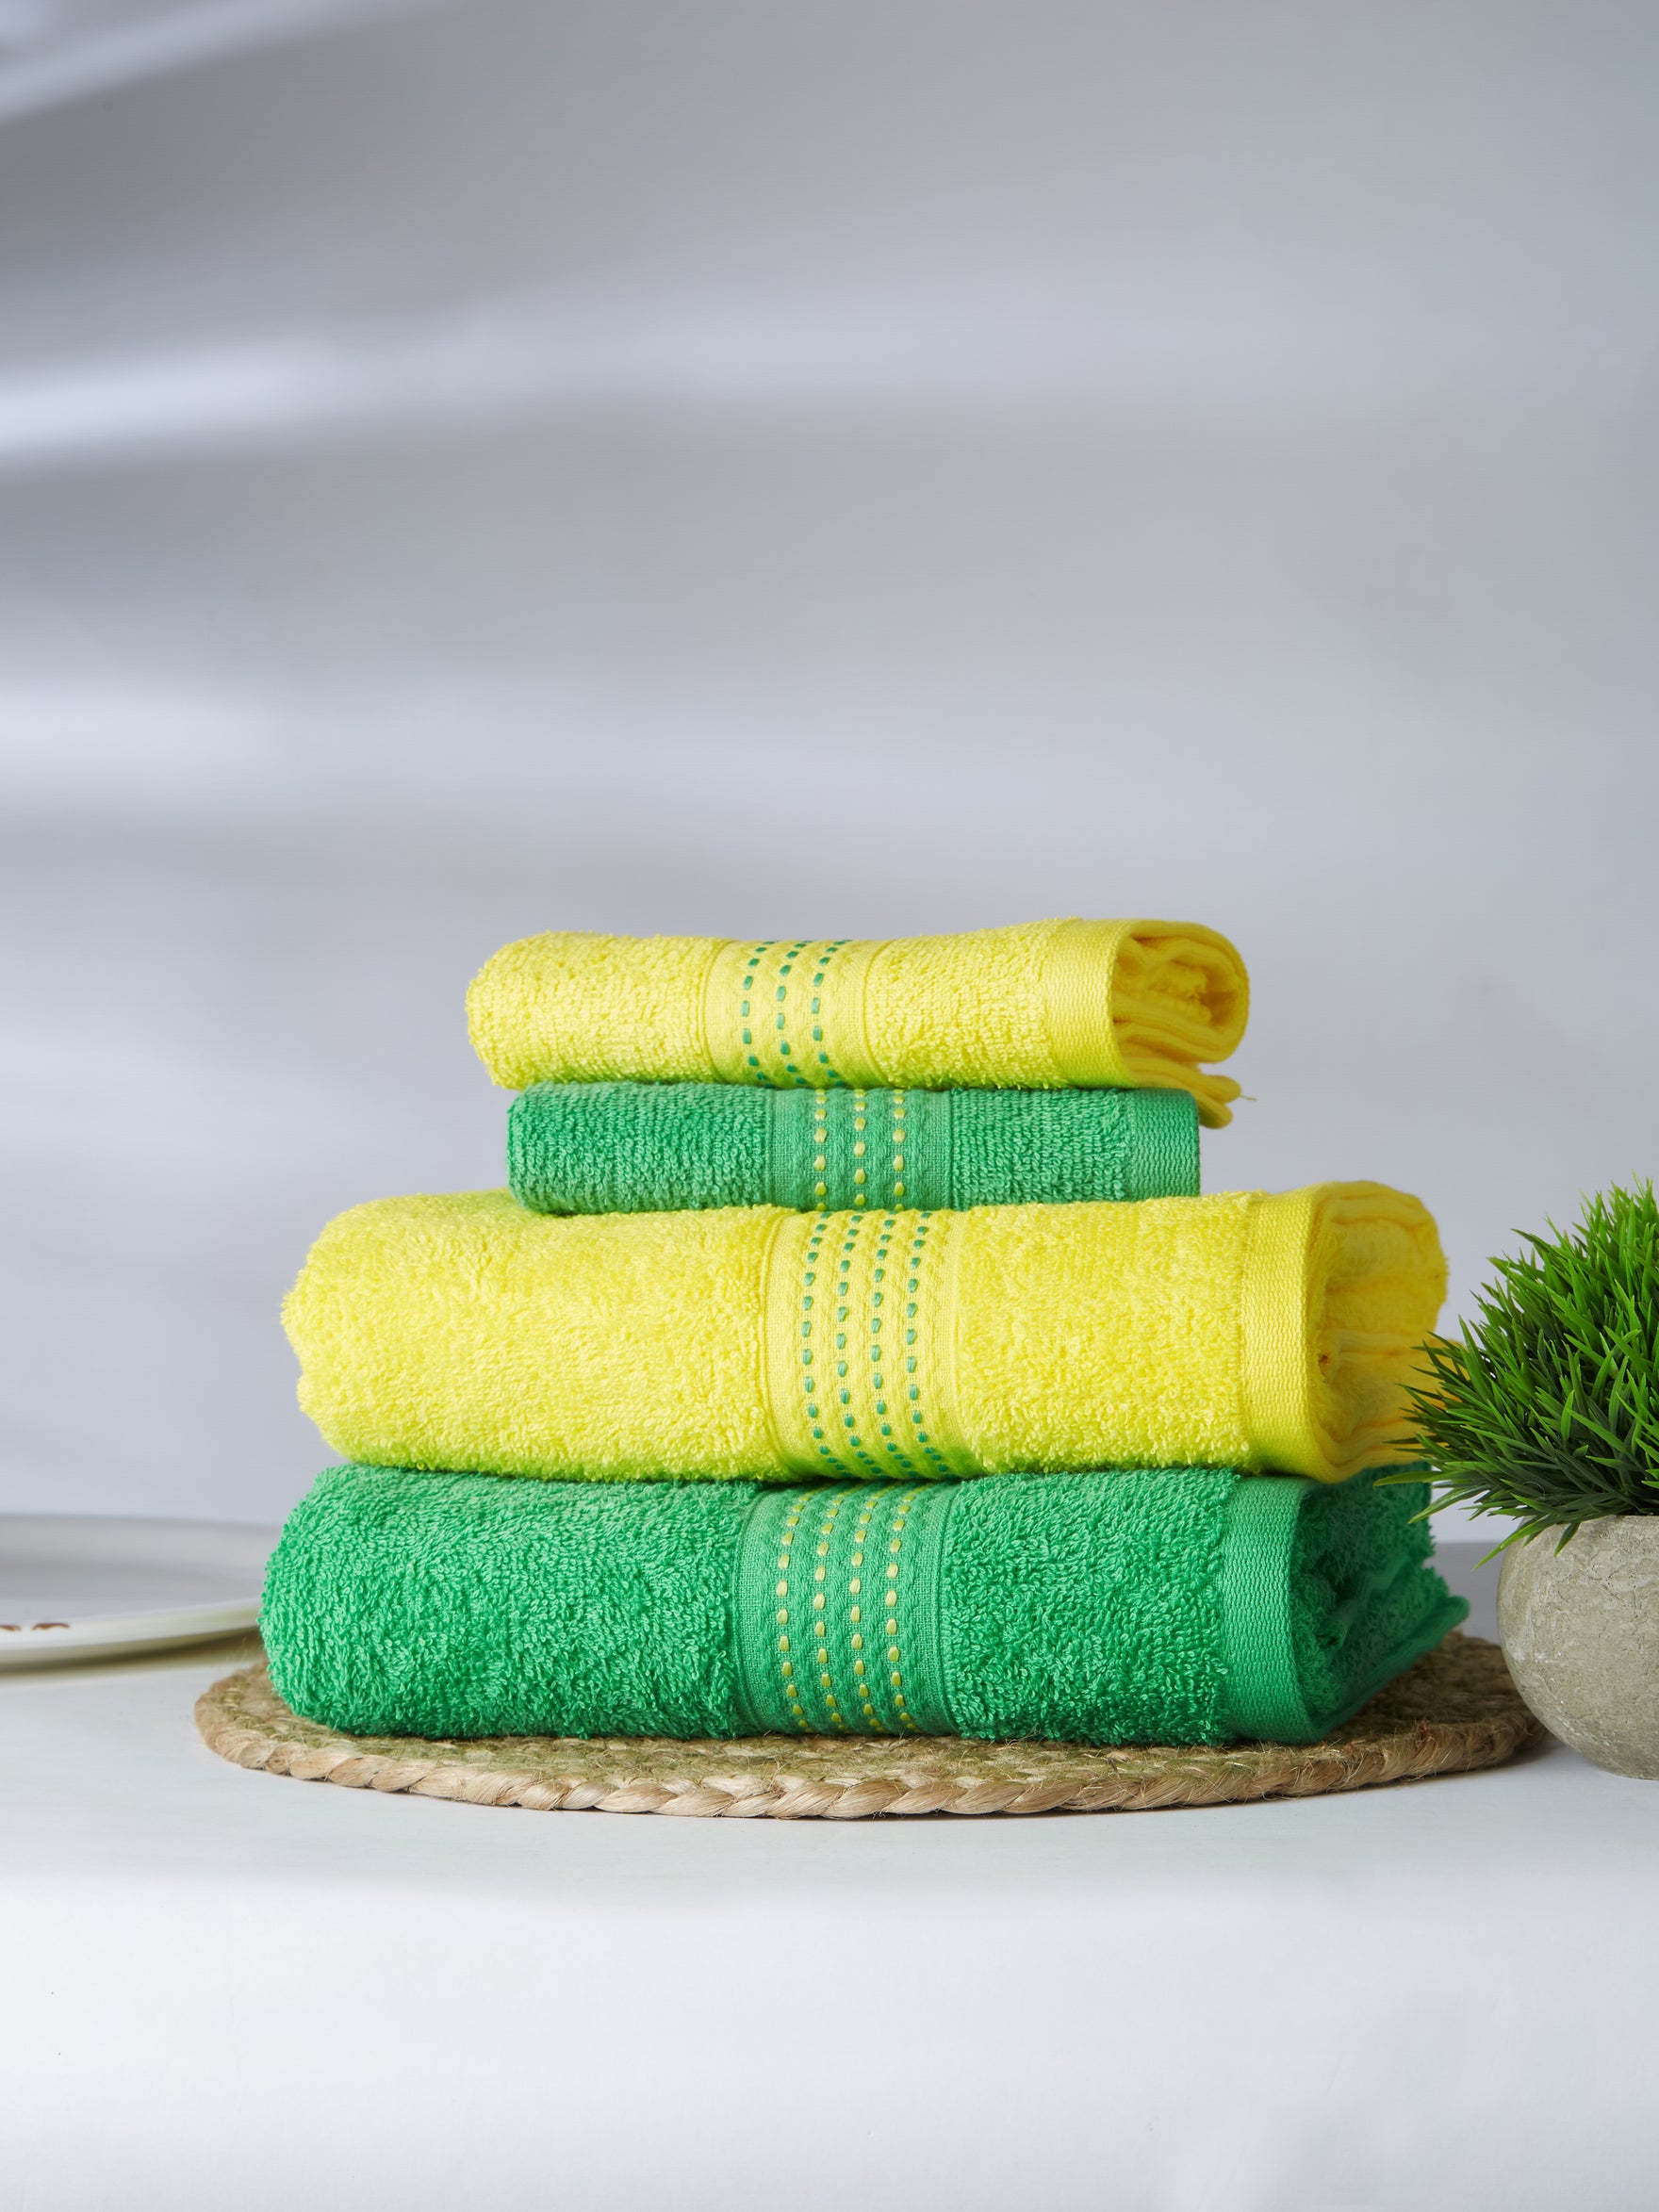 https://www.spaces.in/cdn/shop/articles/All_you_need_to_know_about_Towels_Types_Material_Usage_and_Tips_8e25292c-a610-4fb8-b088-7e122682f3ff.jpg?v=1695320668&width=1760